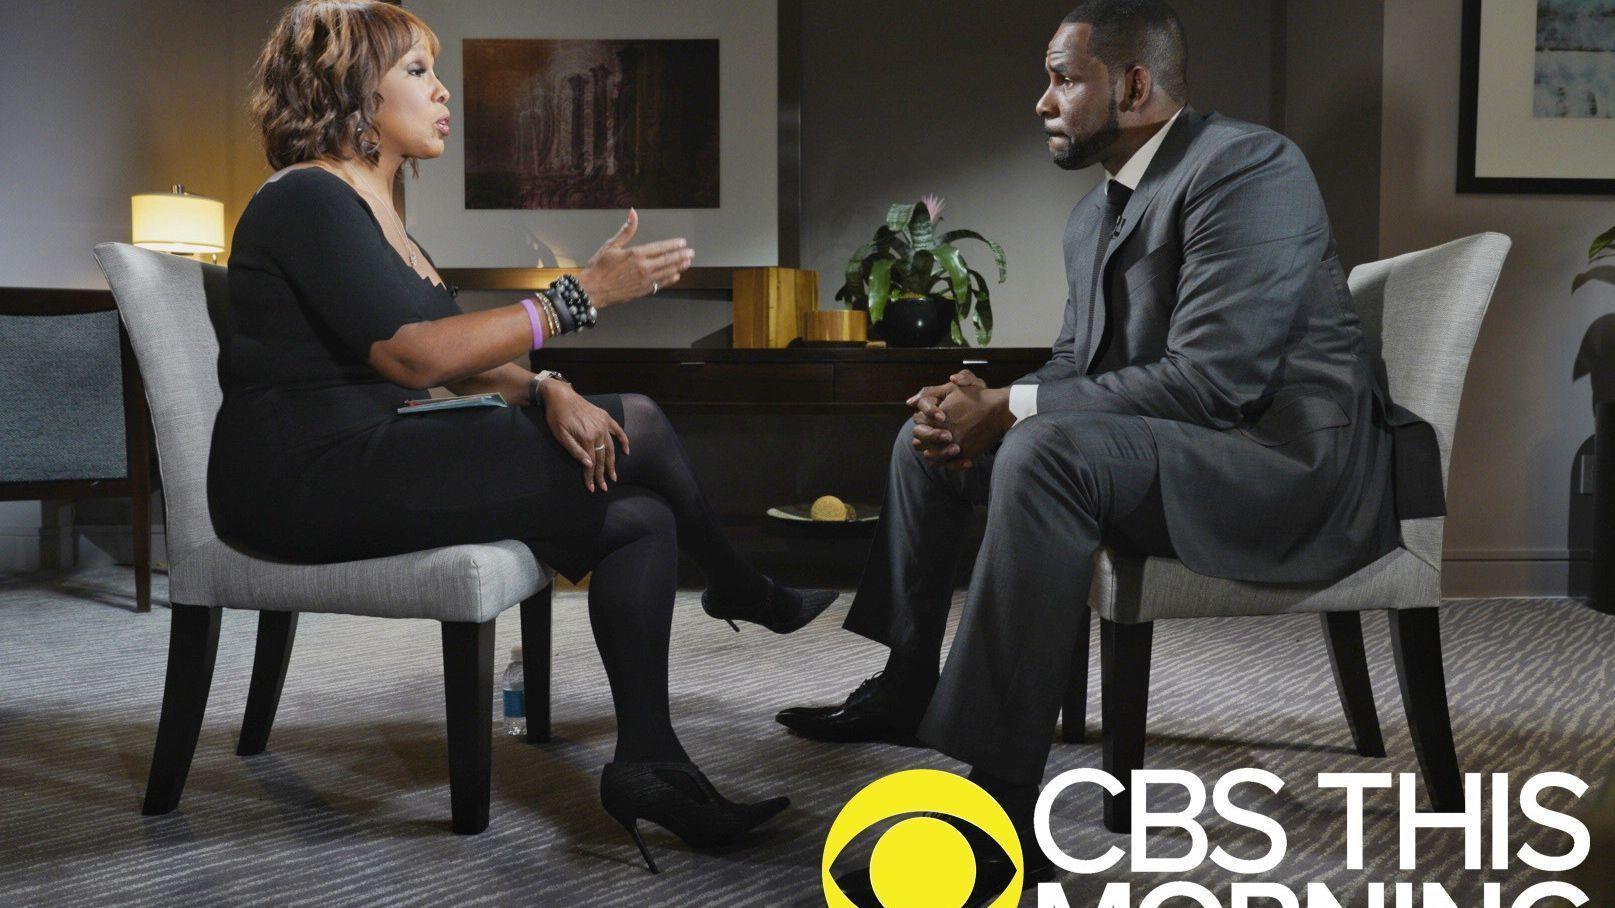 R. Kelly to CBS: 'I'm fighting for my life' - Orlando Sentinel